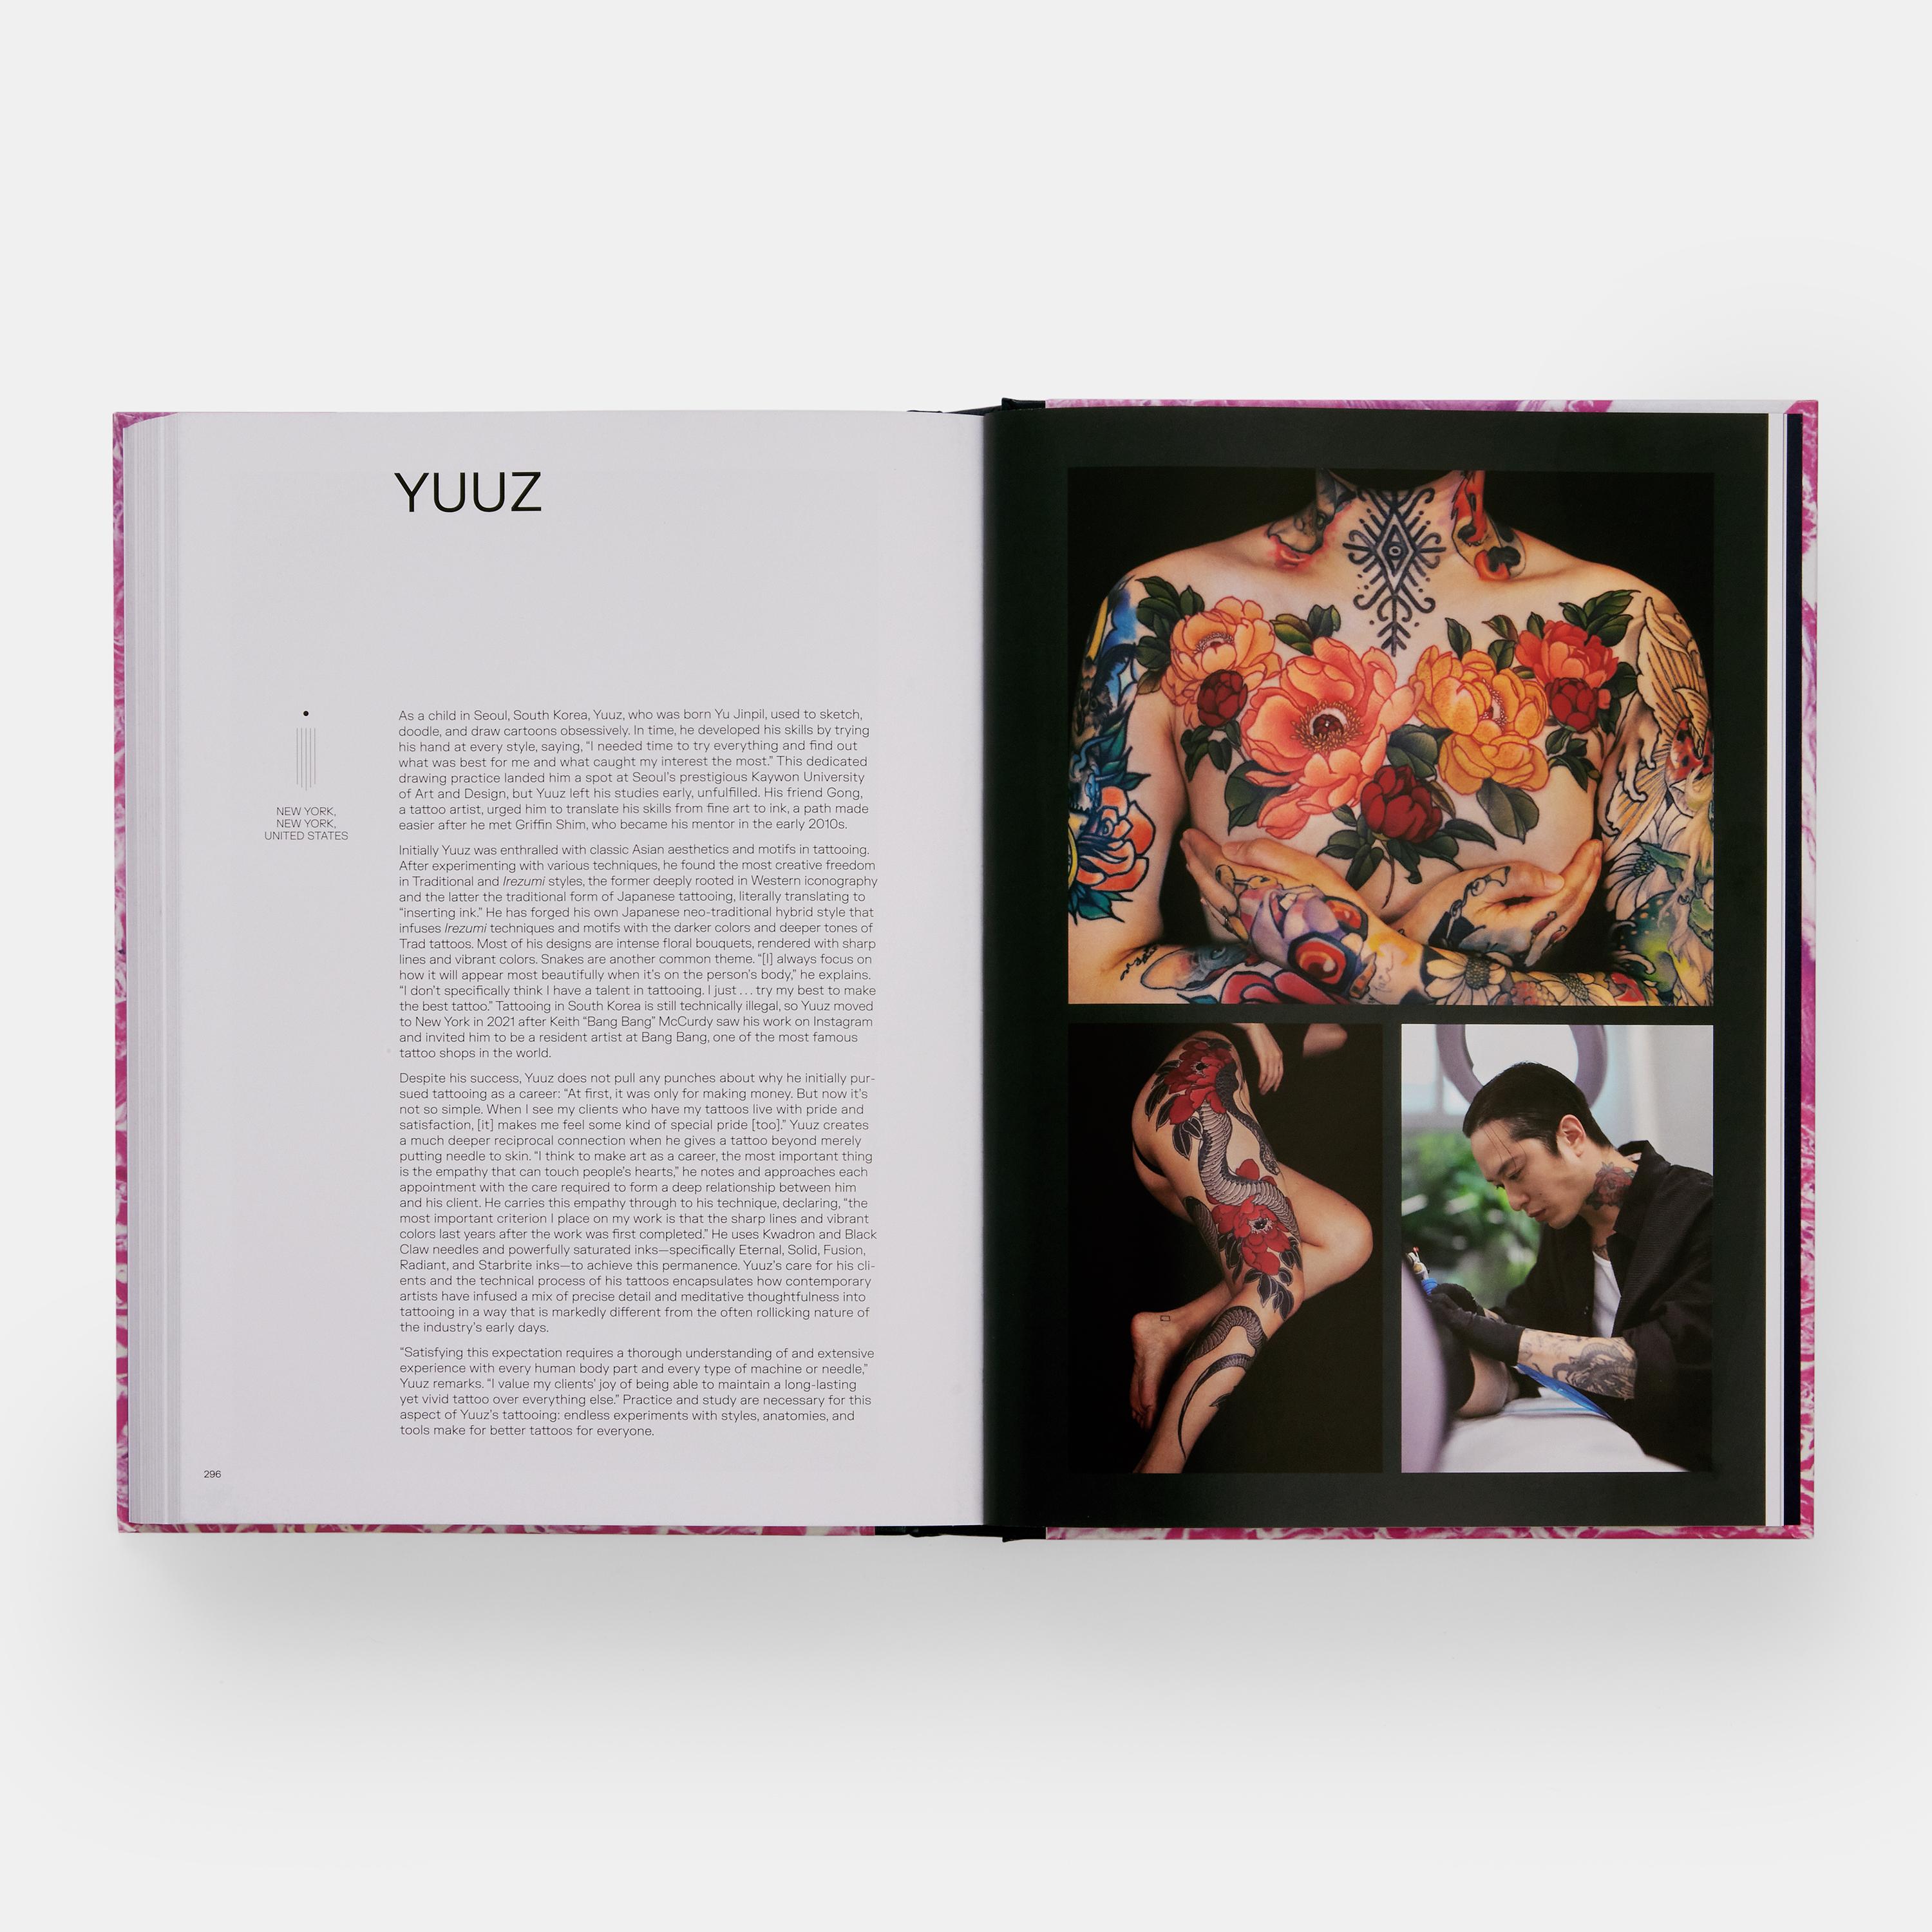 A cutting-edge illustrated survey of 75 contemporary tattoo artists from around the world who are pushing the boundaries of their art form

With nearly 700 images, Tattoo You: A New Generation of Artists showcases 75 rising stars who are redefining